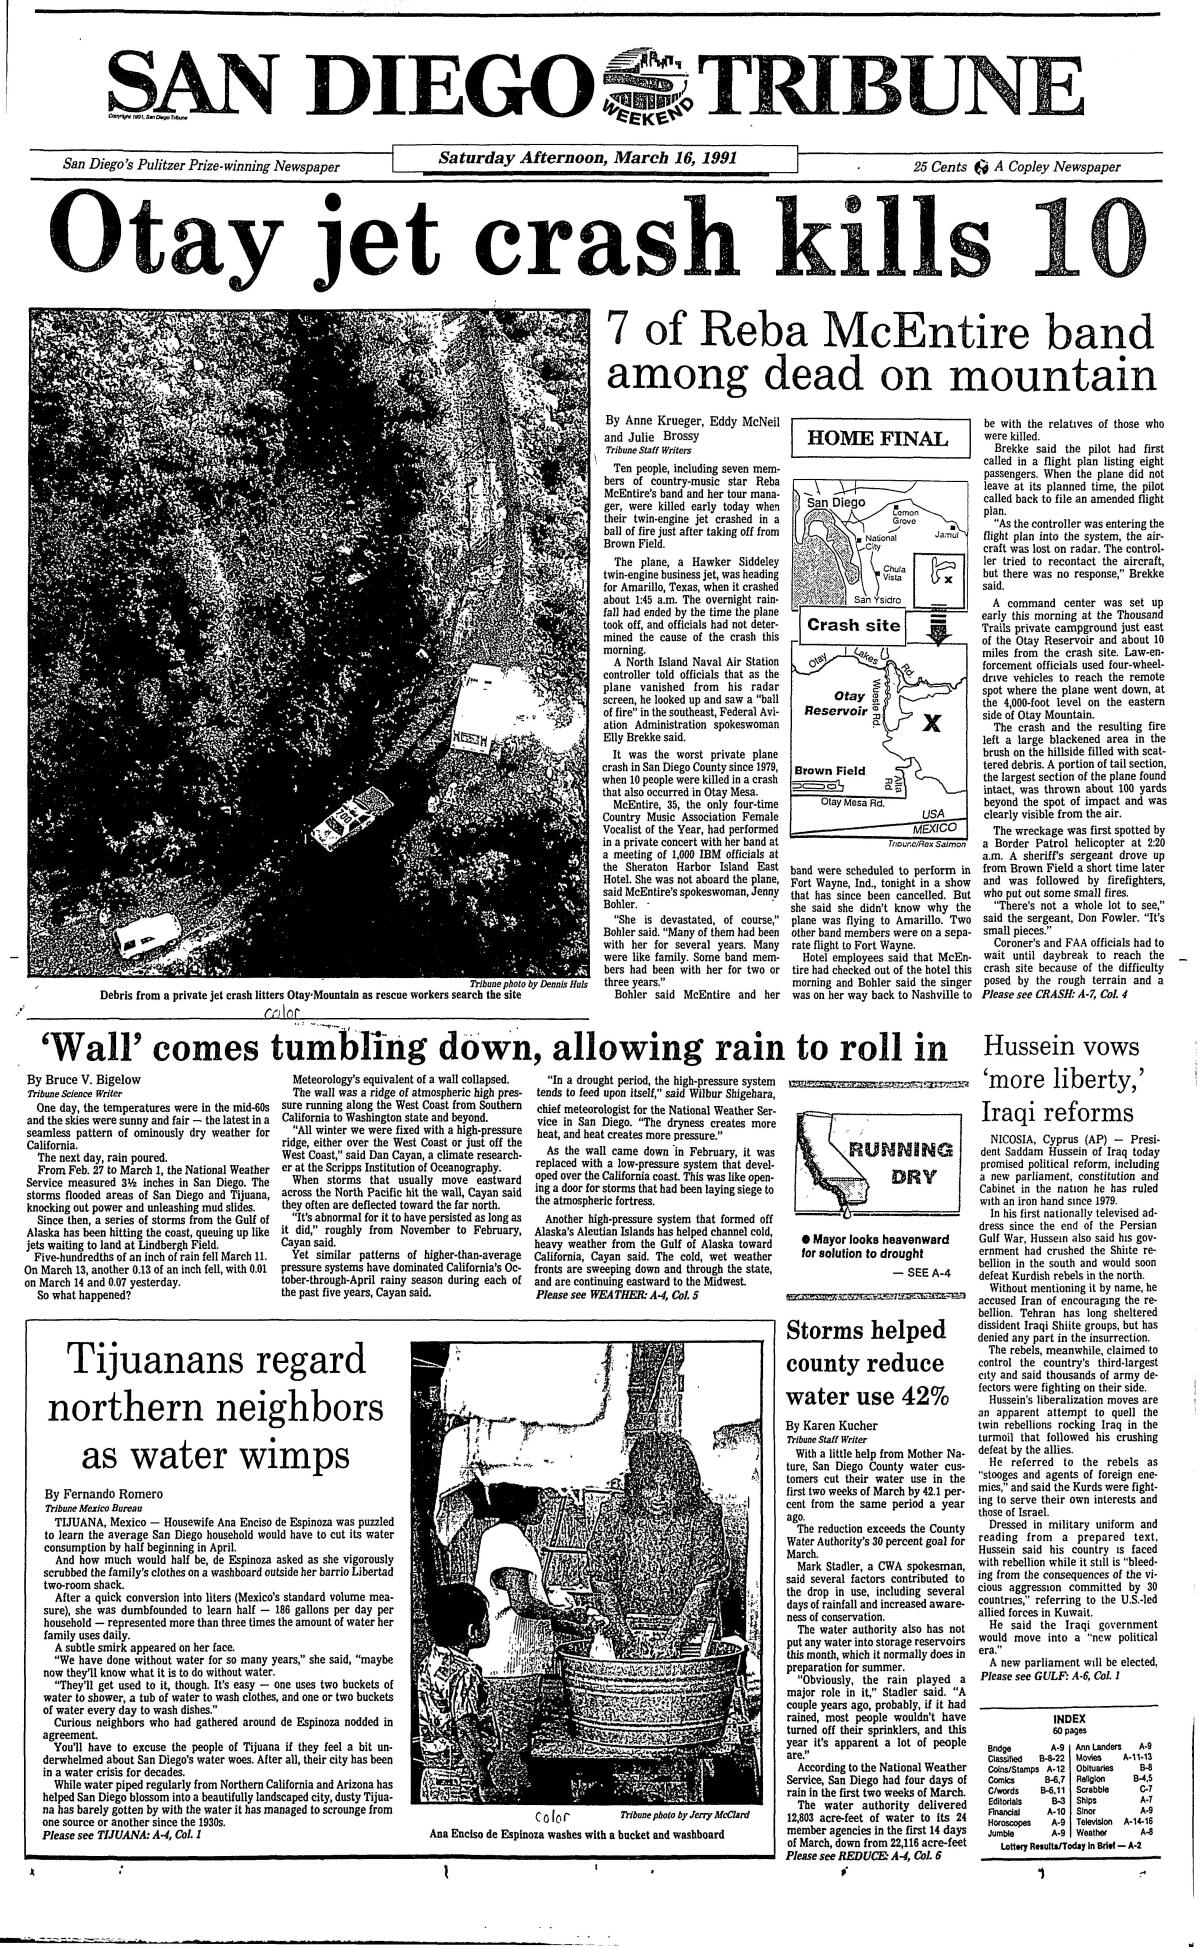 Plane crash news on front page of the San Diego Tribune from March 16, 1991 